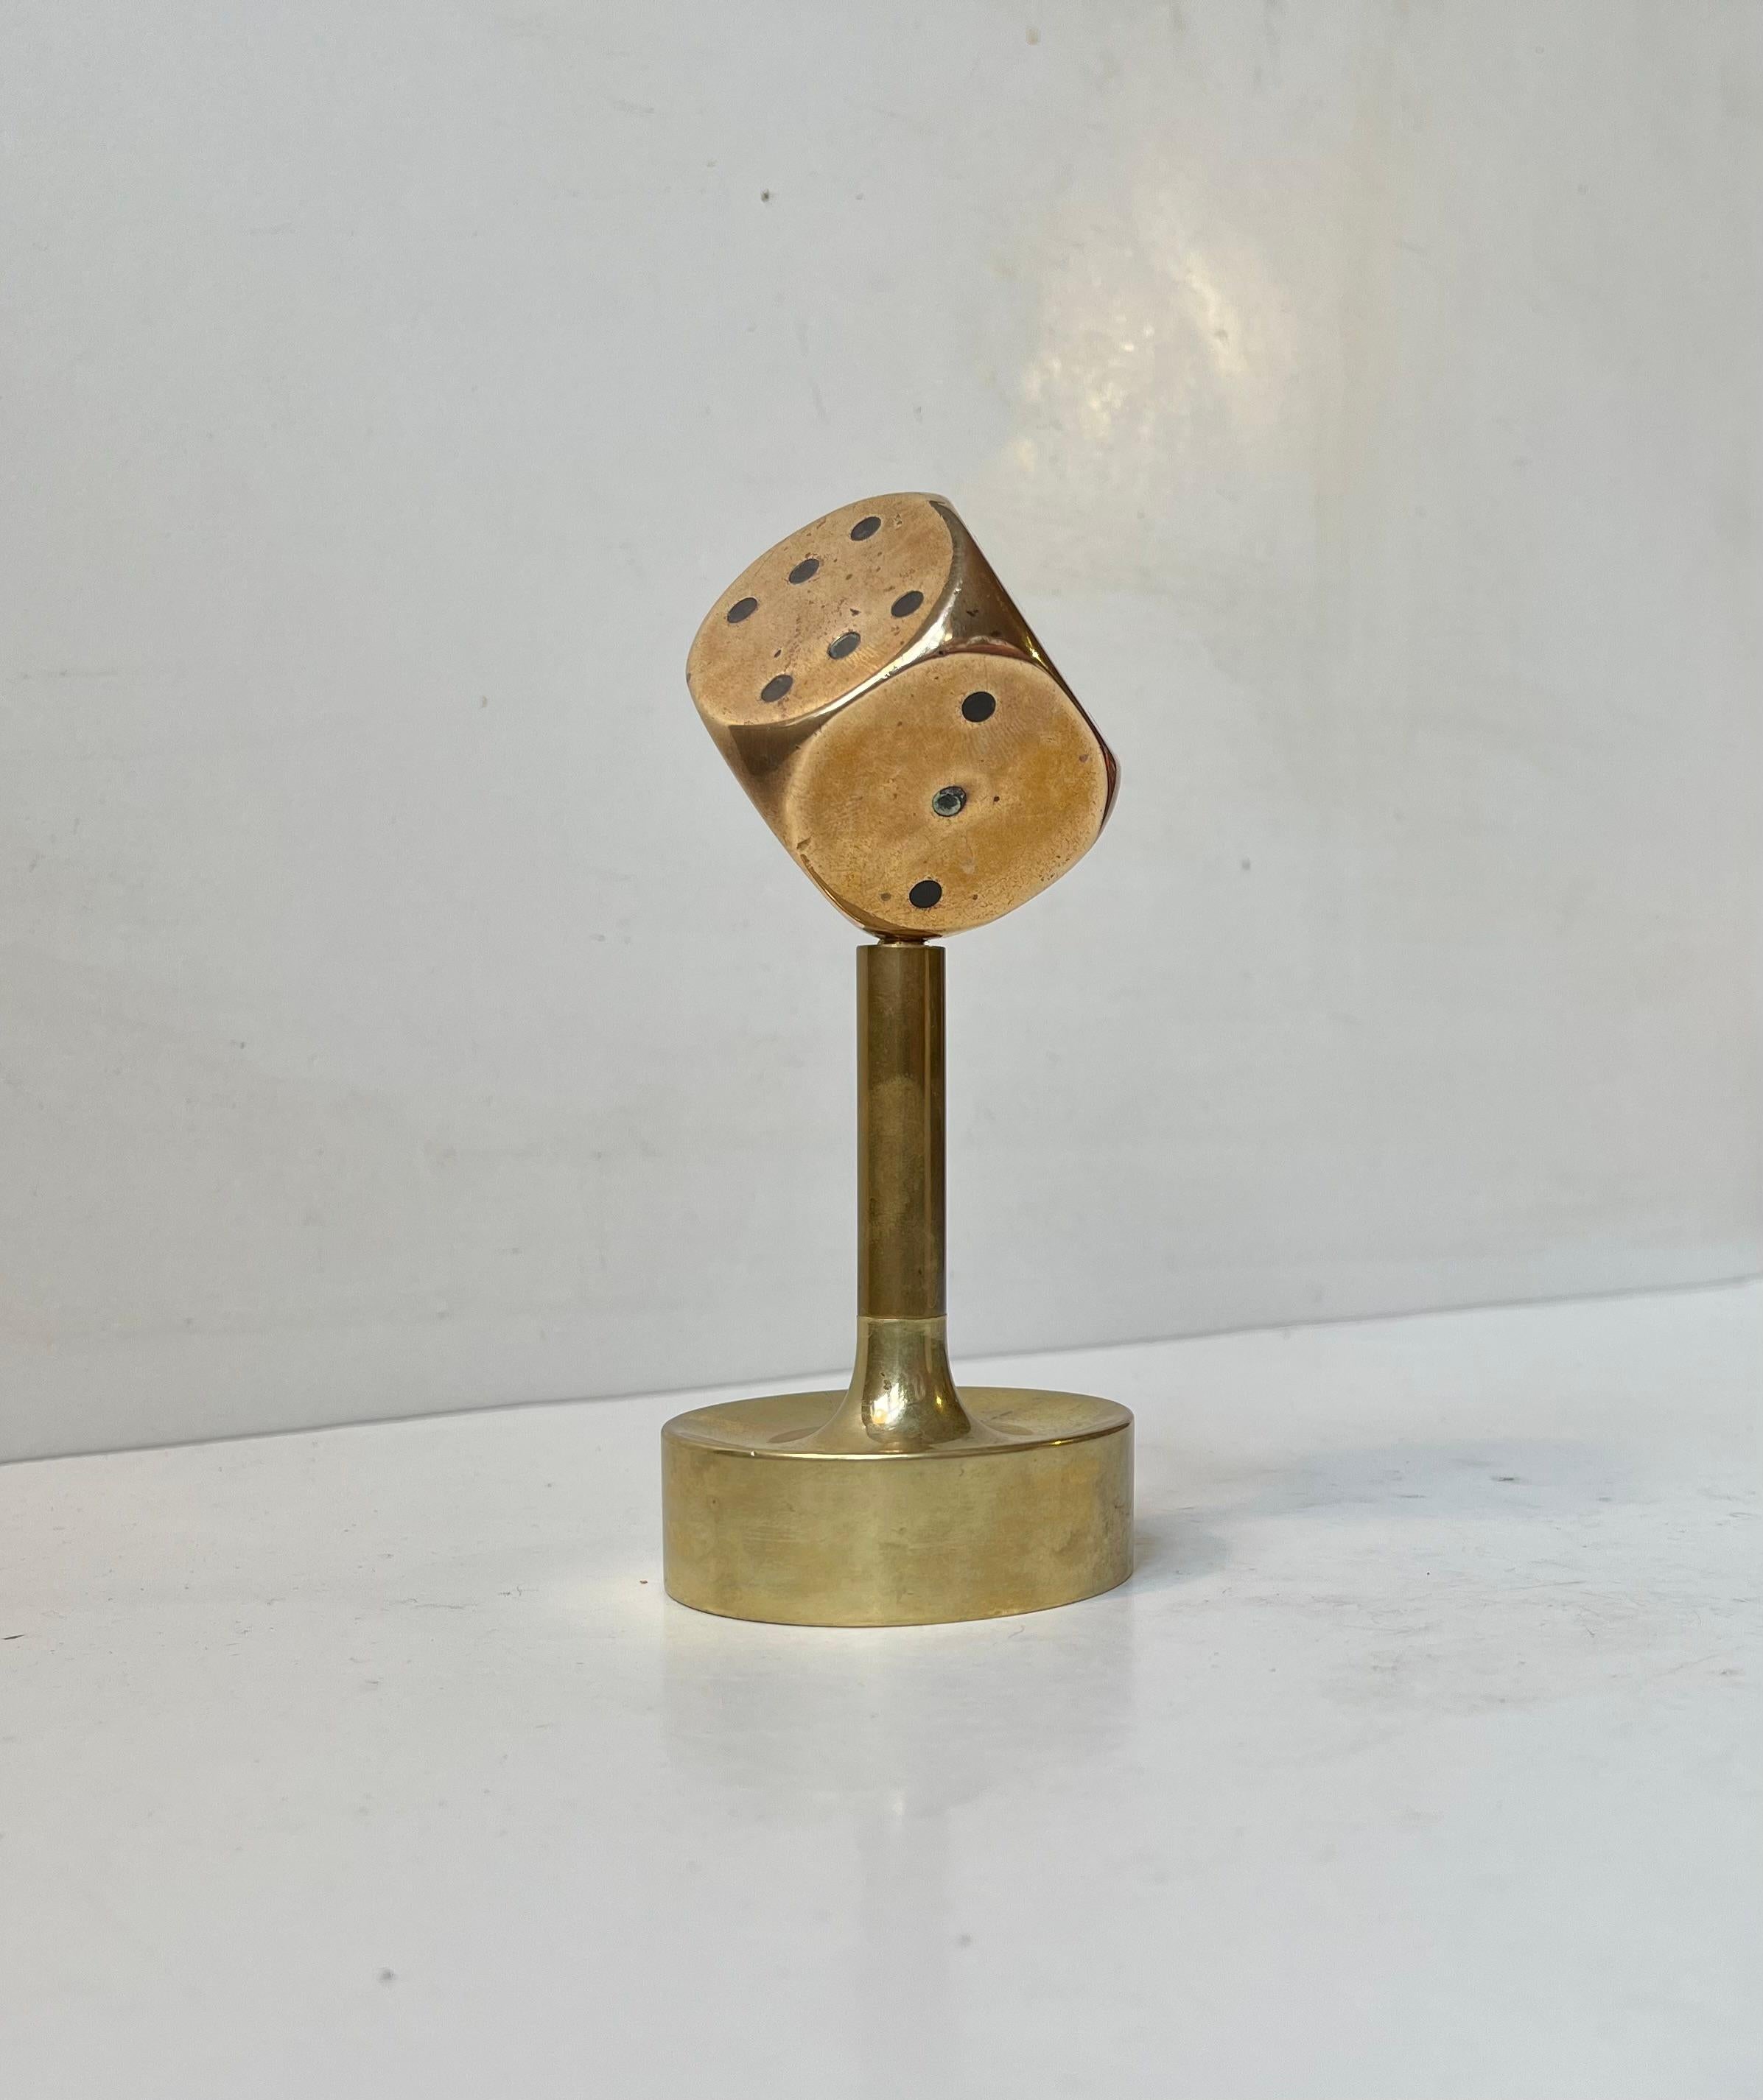 Small unusual desk sculpture with removable bronze dice. Despite its small size its very heavy. The dice may have been mounted as a hood ornament originally and then made in to a decorative piece by an unknown probably Scandinavian metalworker.